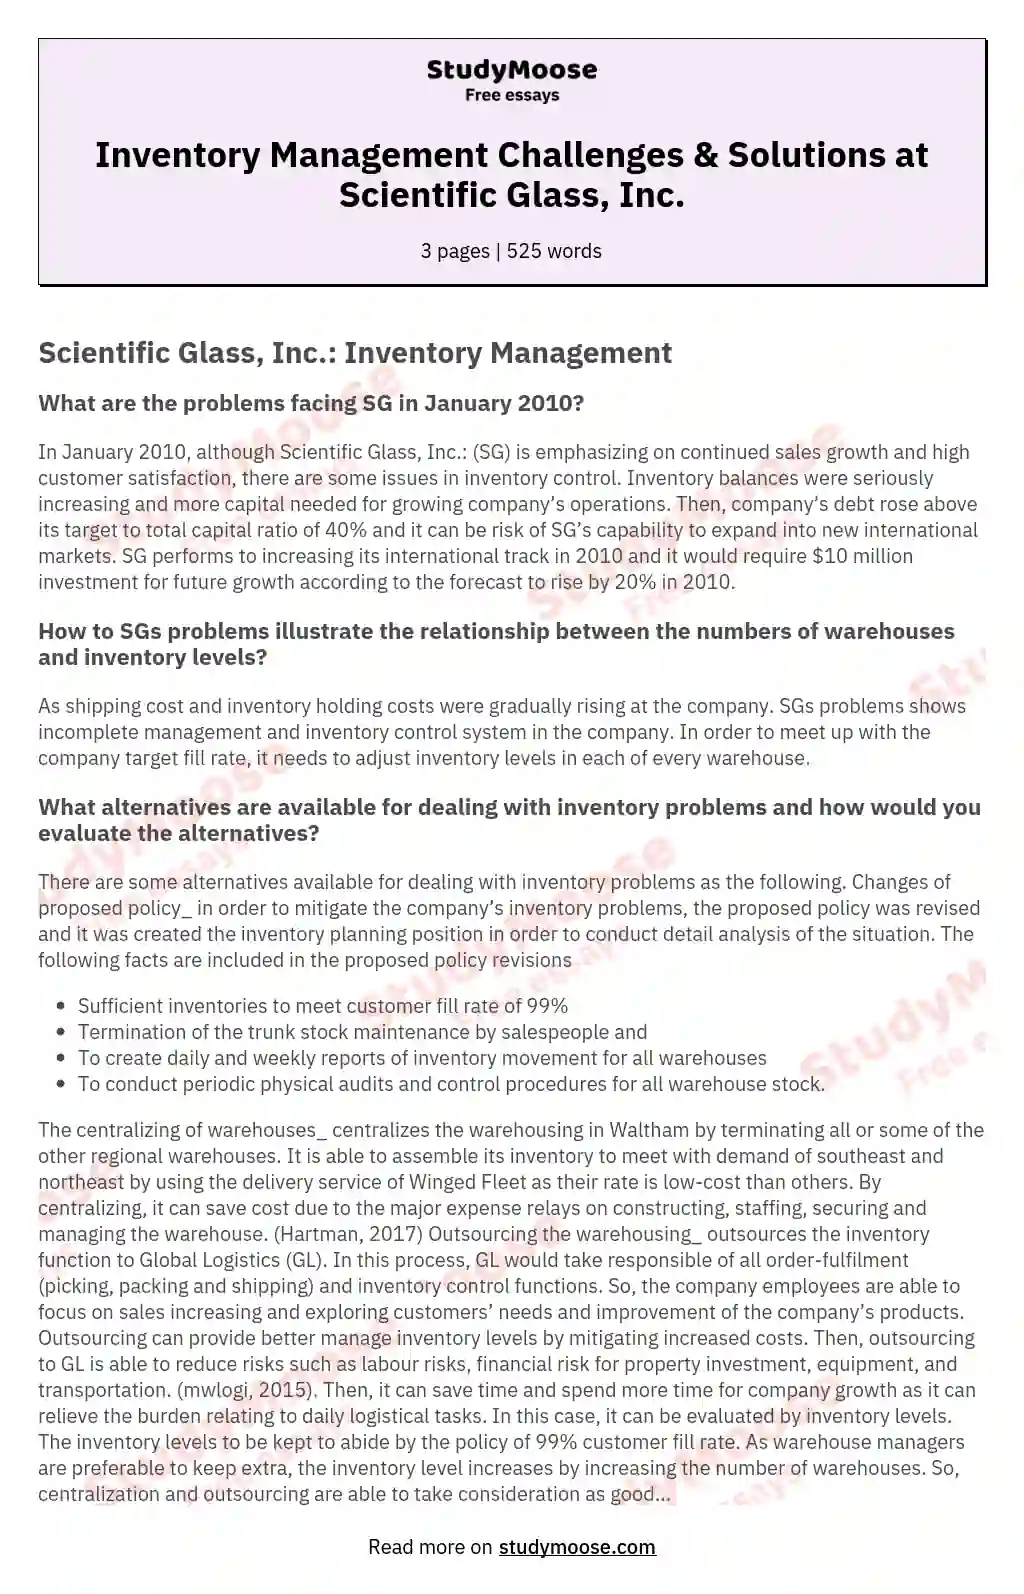 Inventory Management Challenges & Solutions at Scientific Glass, Inc. essay